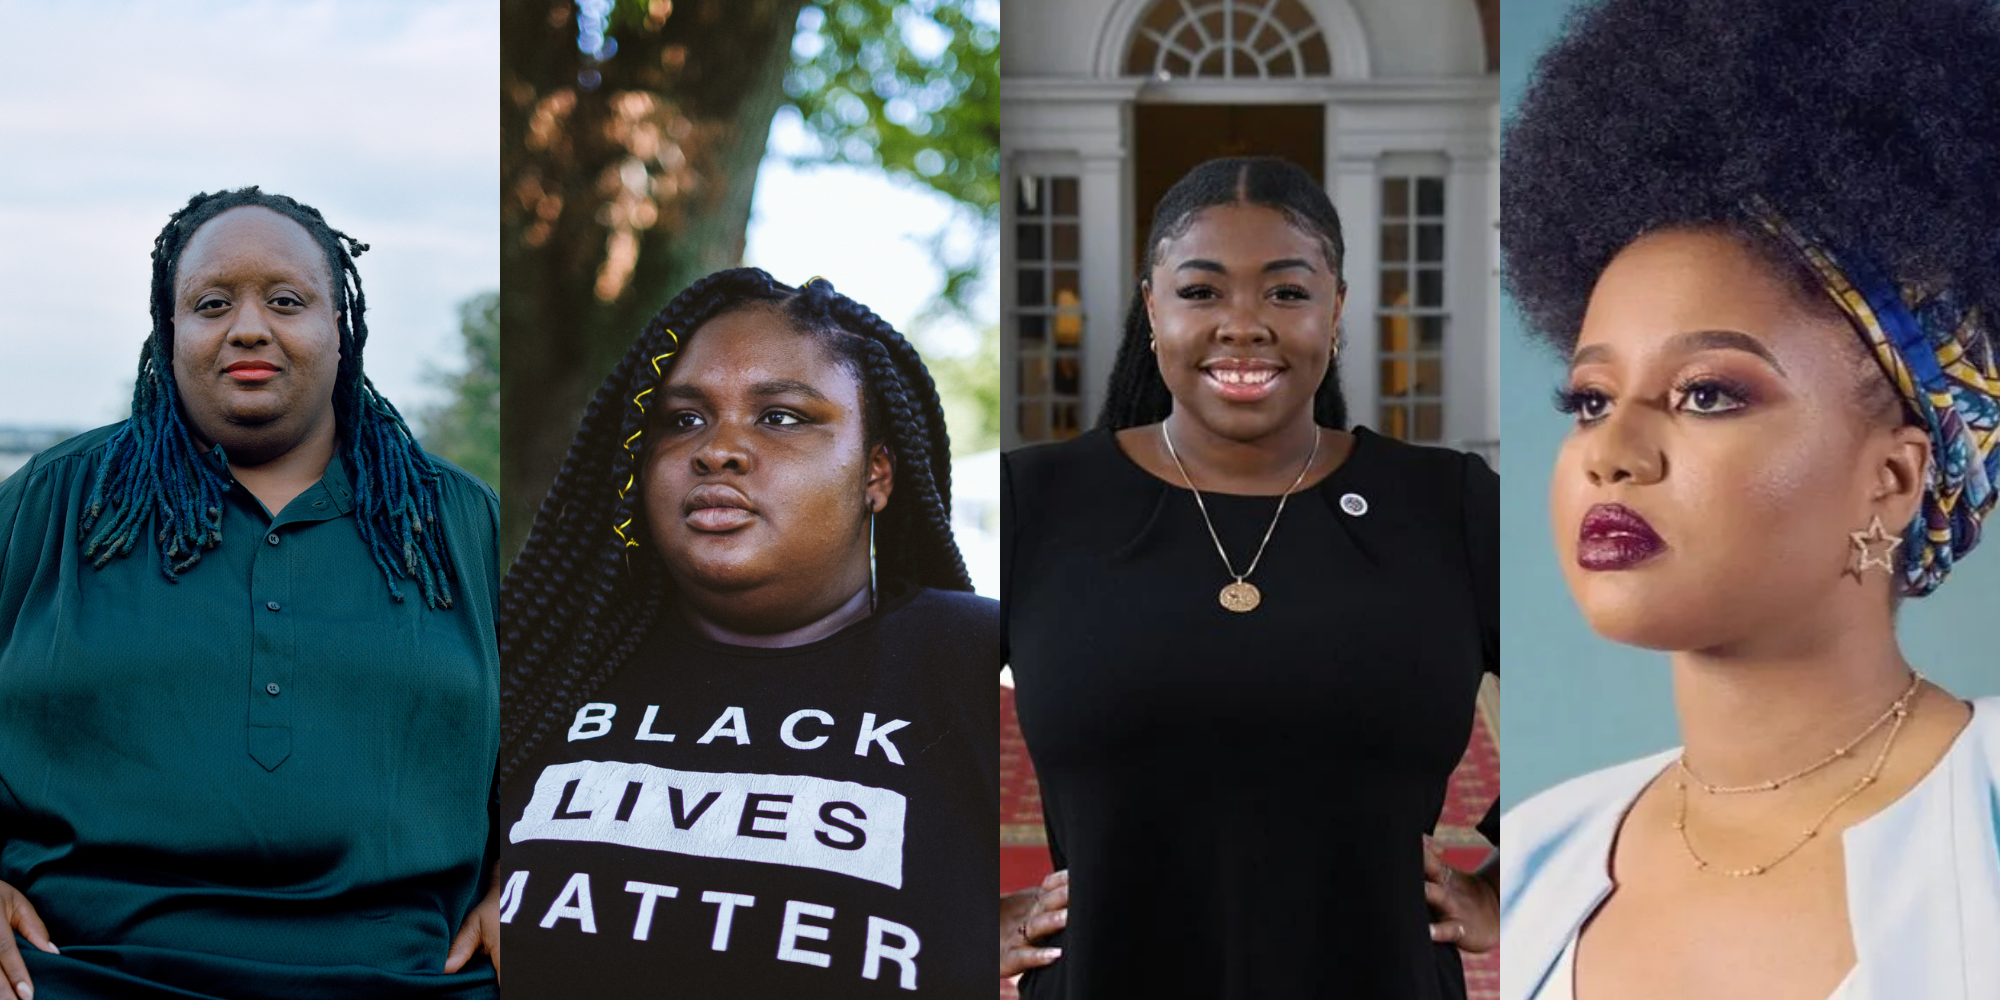 Meet the young Black women who are making history today